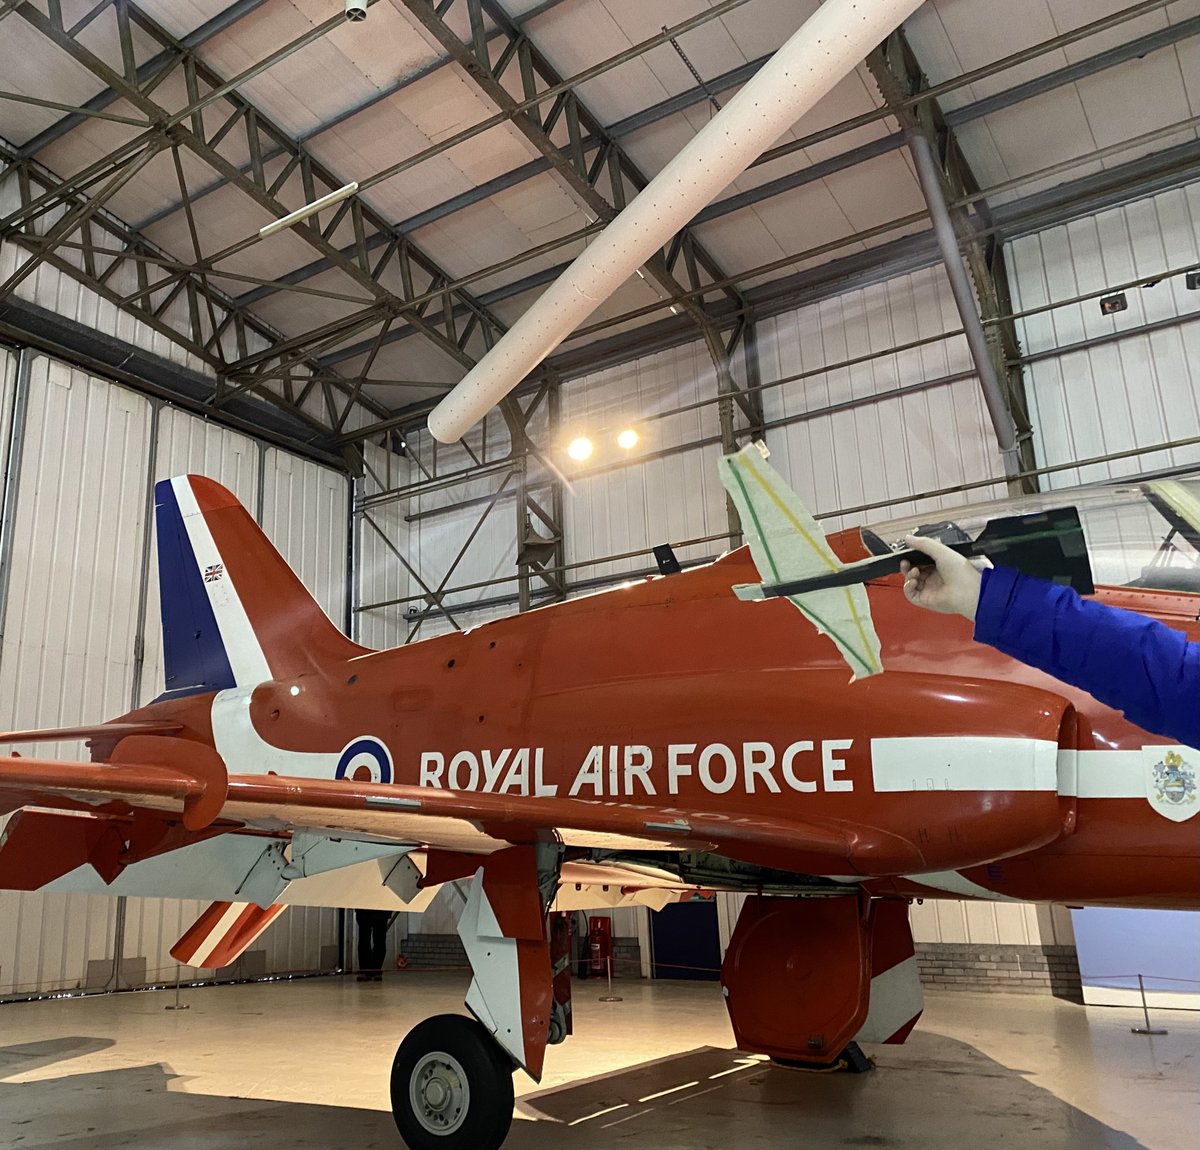 Mach 1. Mach 2. How fast can you fly? Join us at the National Museum of Flight for our Glider Technical Challenge this Spring Holiday as part of Edinburgh Science Festival. @EdSciFest #STEM #FlyingintotheFuture